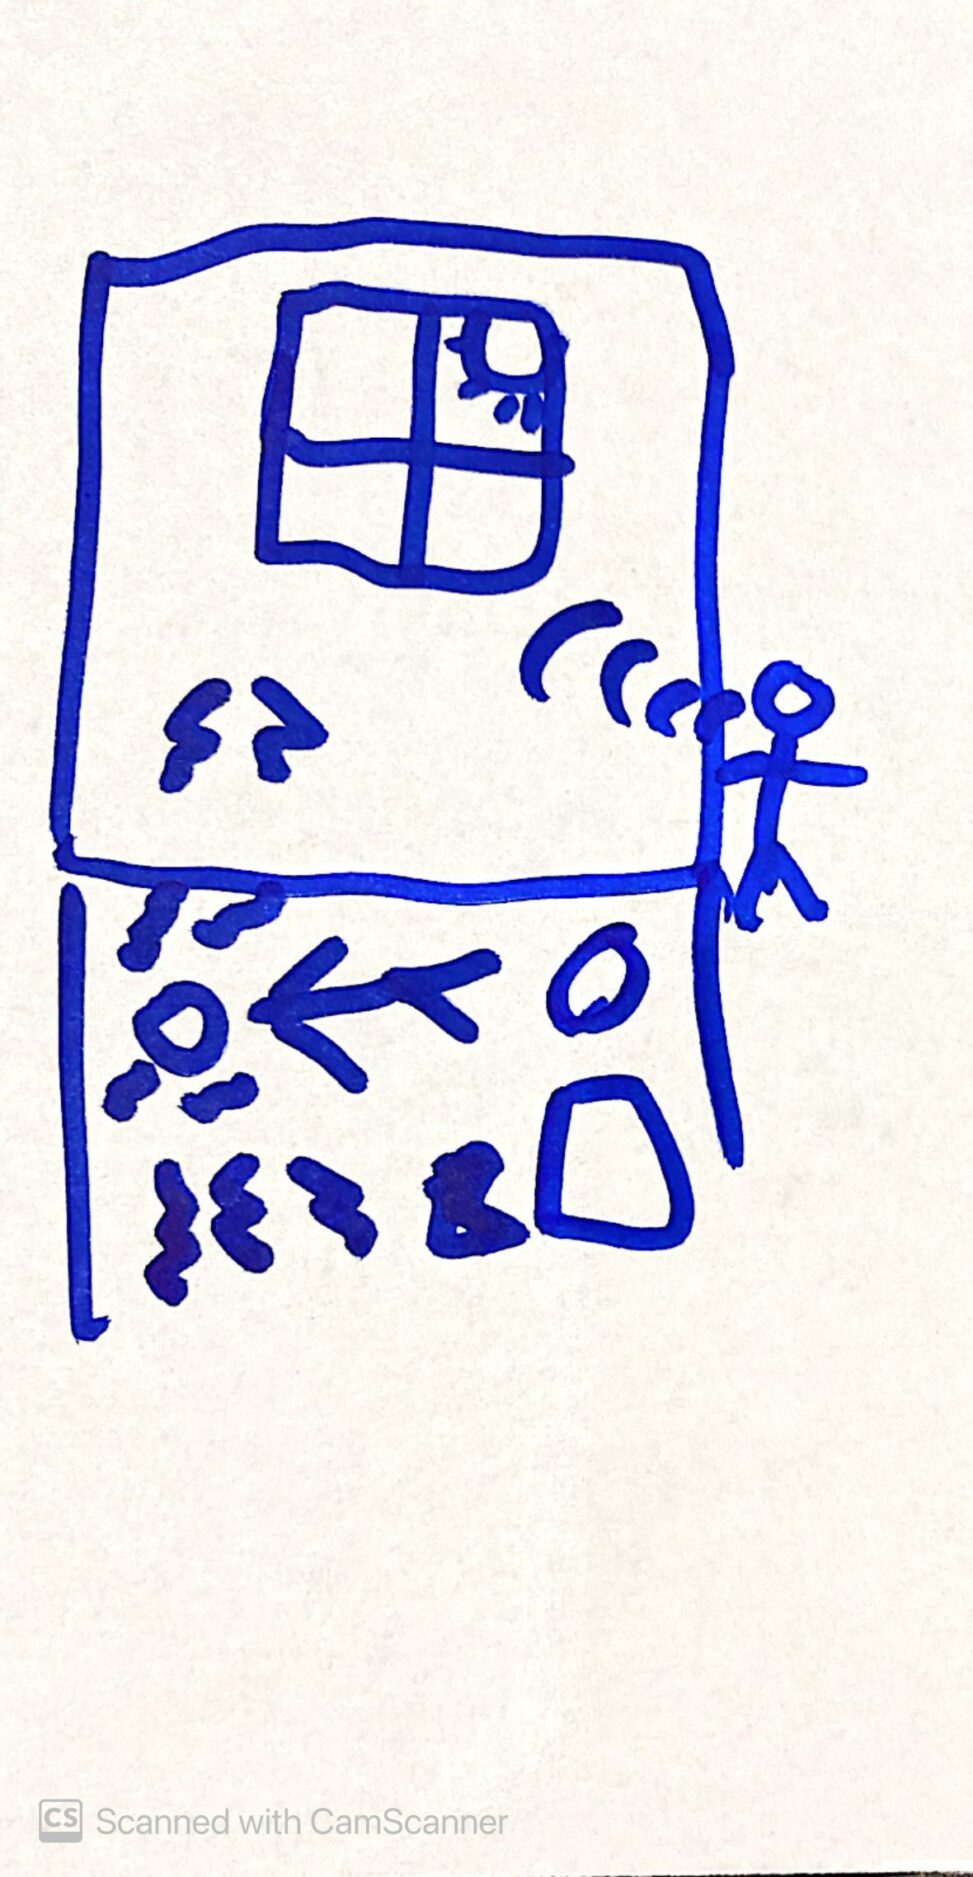 person laying down with clutter and noise all around him in a room another stick figure is yelling into the room